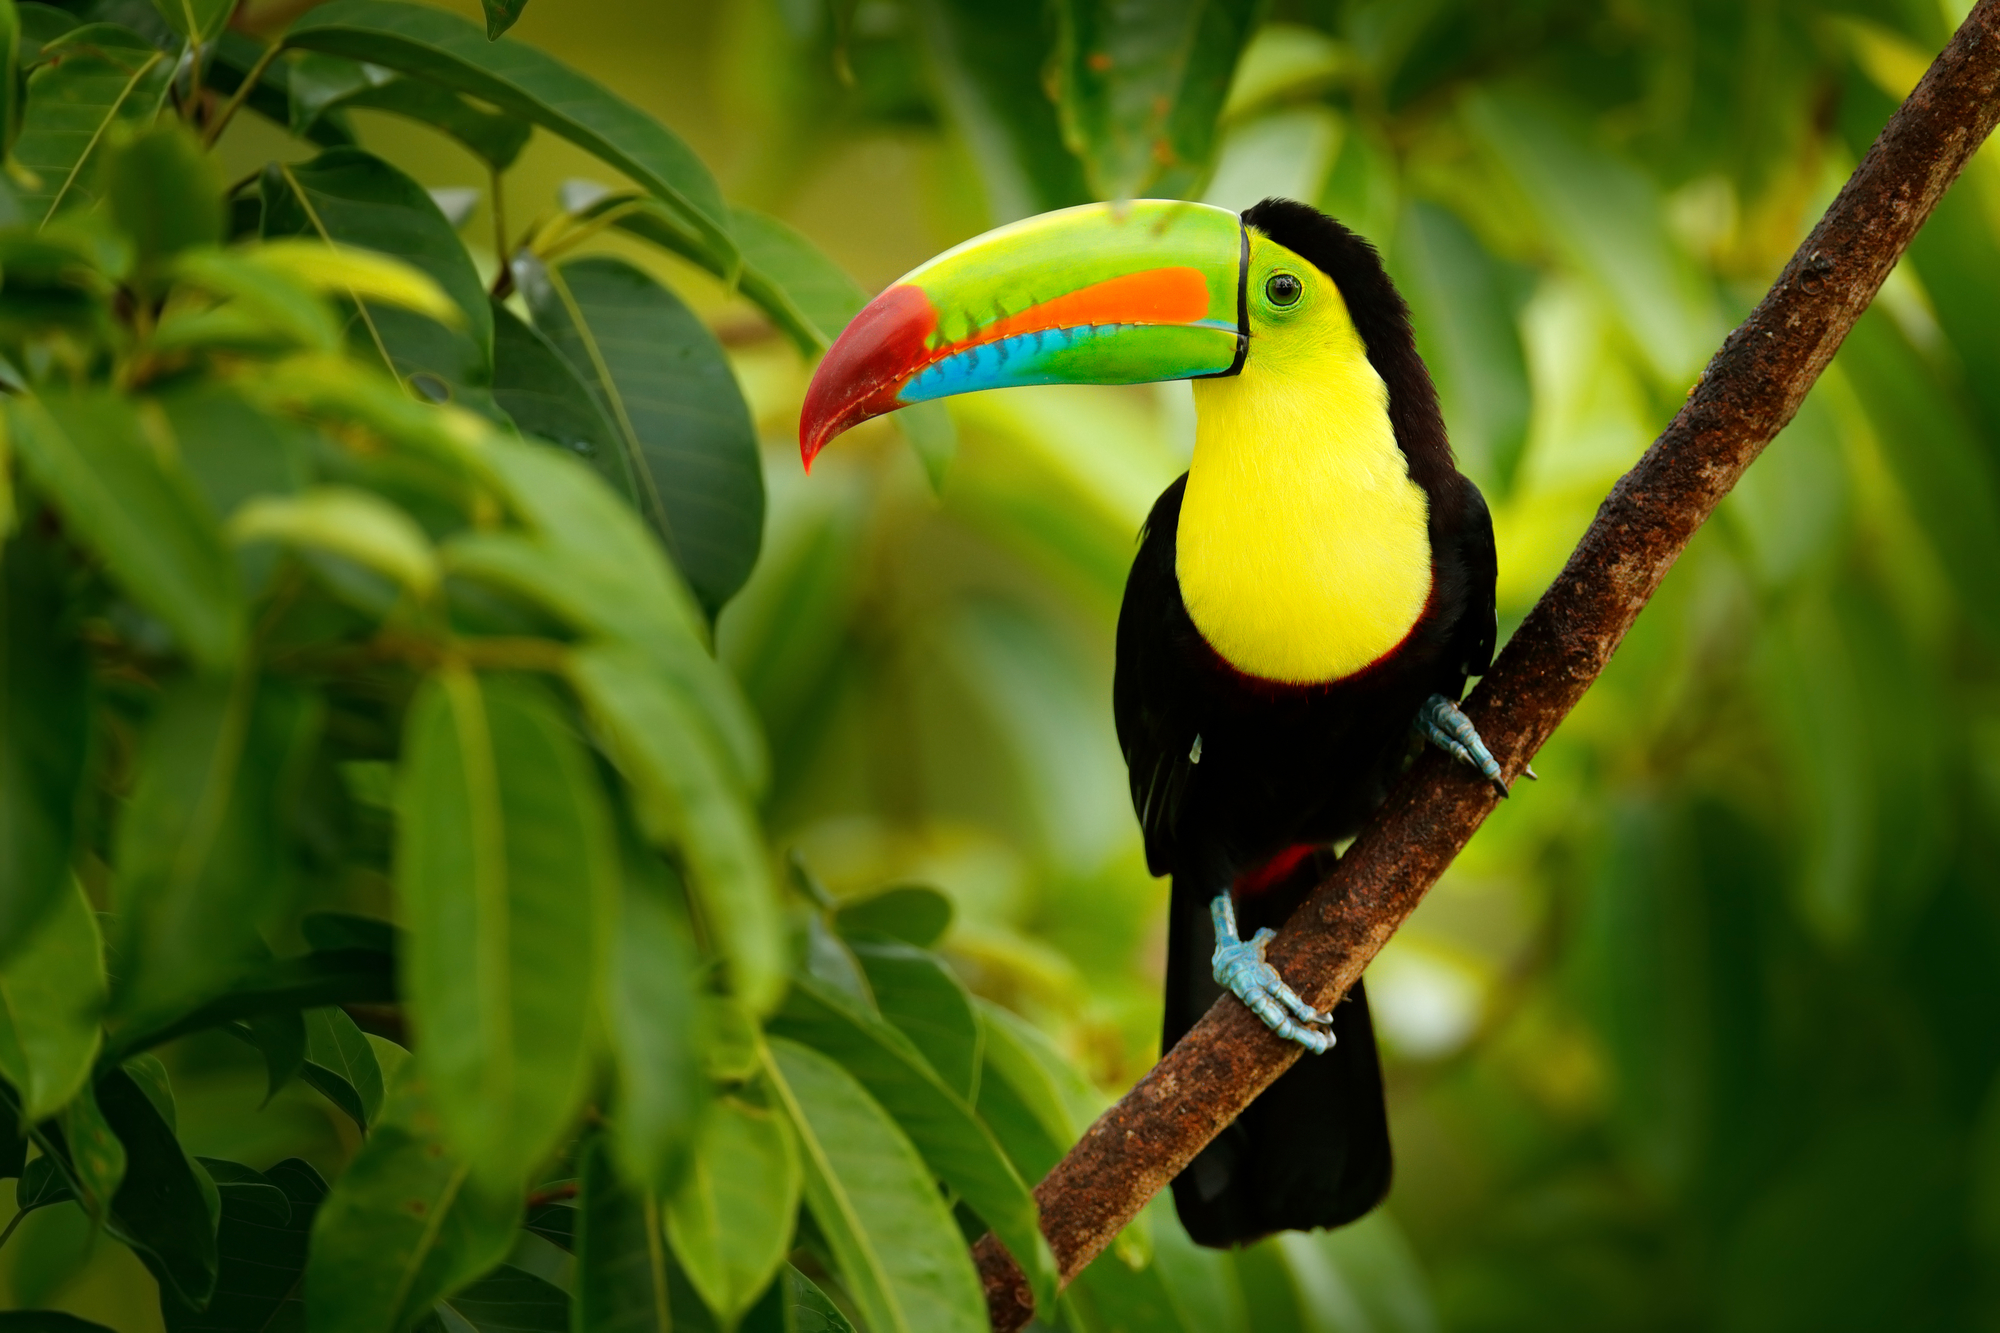 Toucan perched on branch